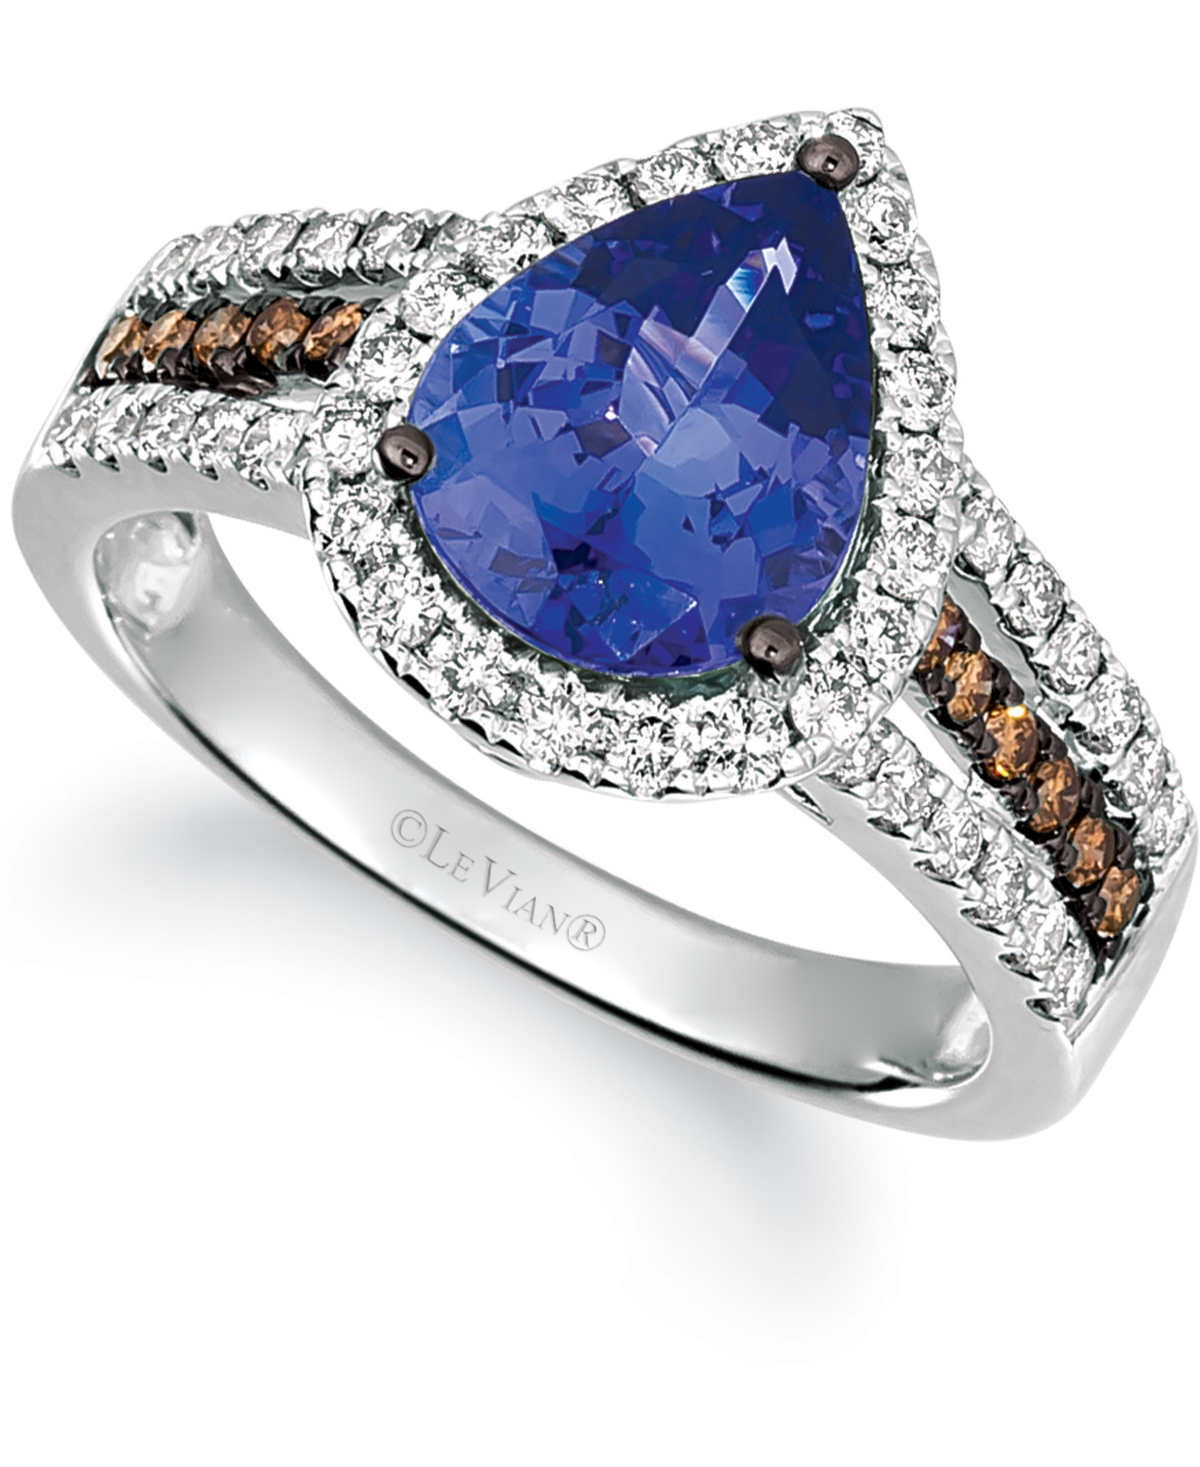 Le Vian Blueberry Tanzanite (2 ct. t.w.) & Diamond (5/8 ct. t.w.) Ring in 14k White Gold (Also available in 14K Rose Gold and 14K Gold)